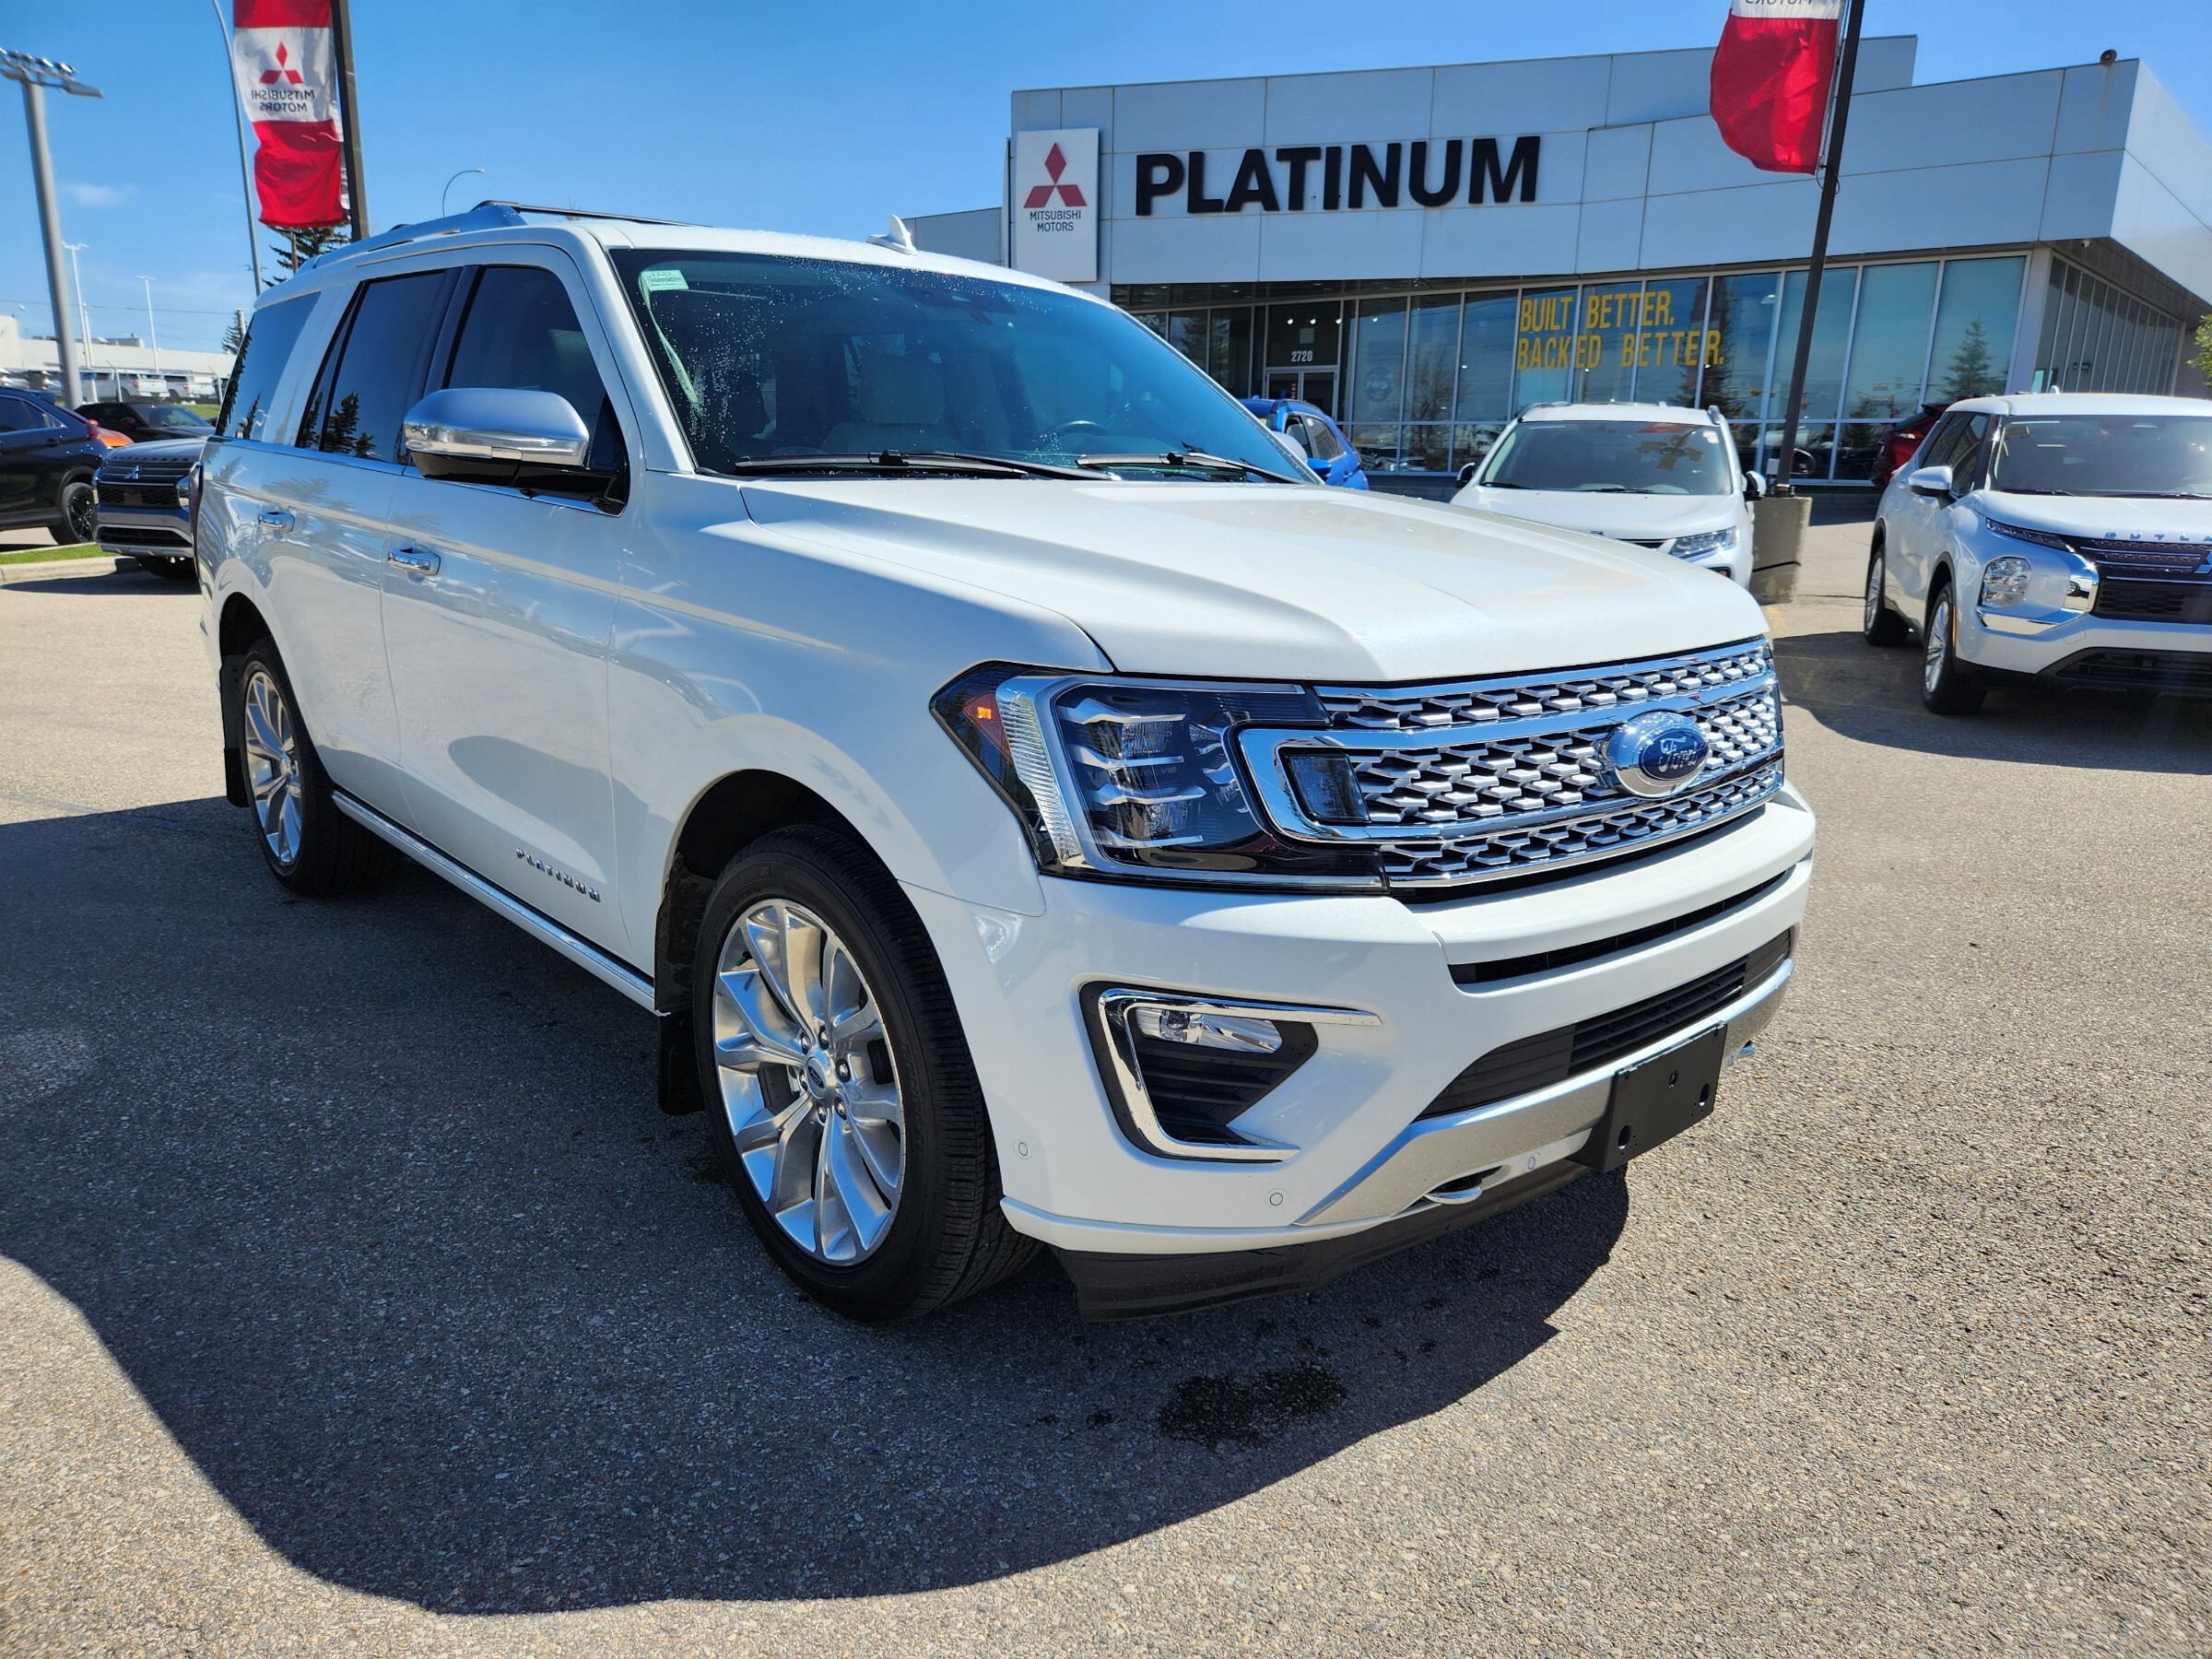 2021 Ford Expedition Fully Loaded Platinum Trim Level